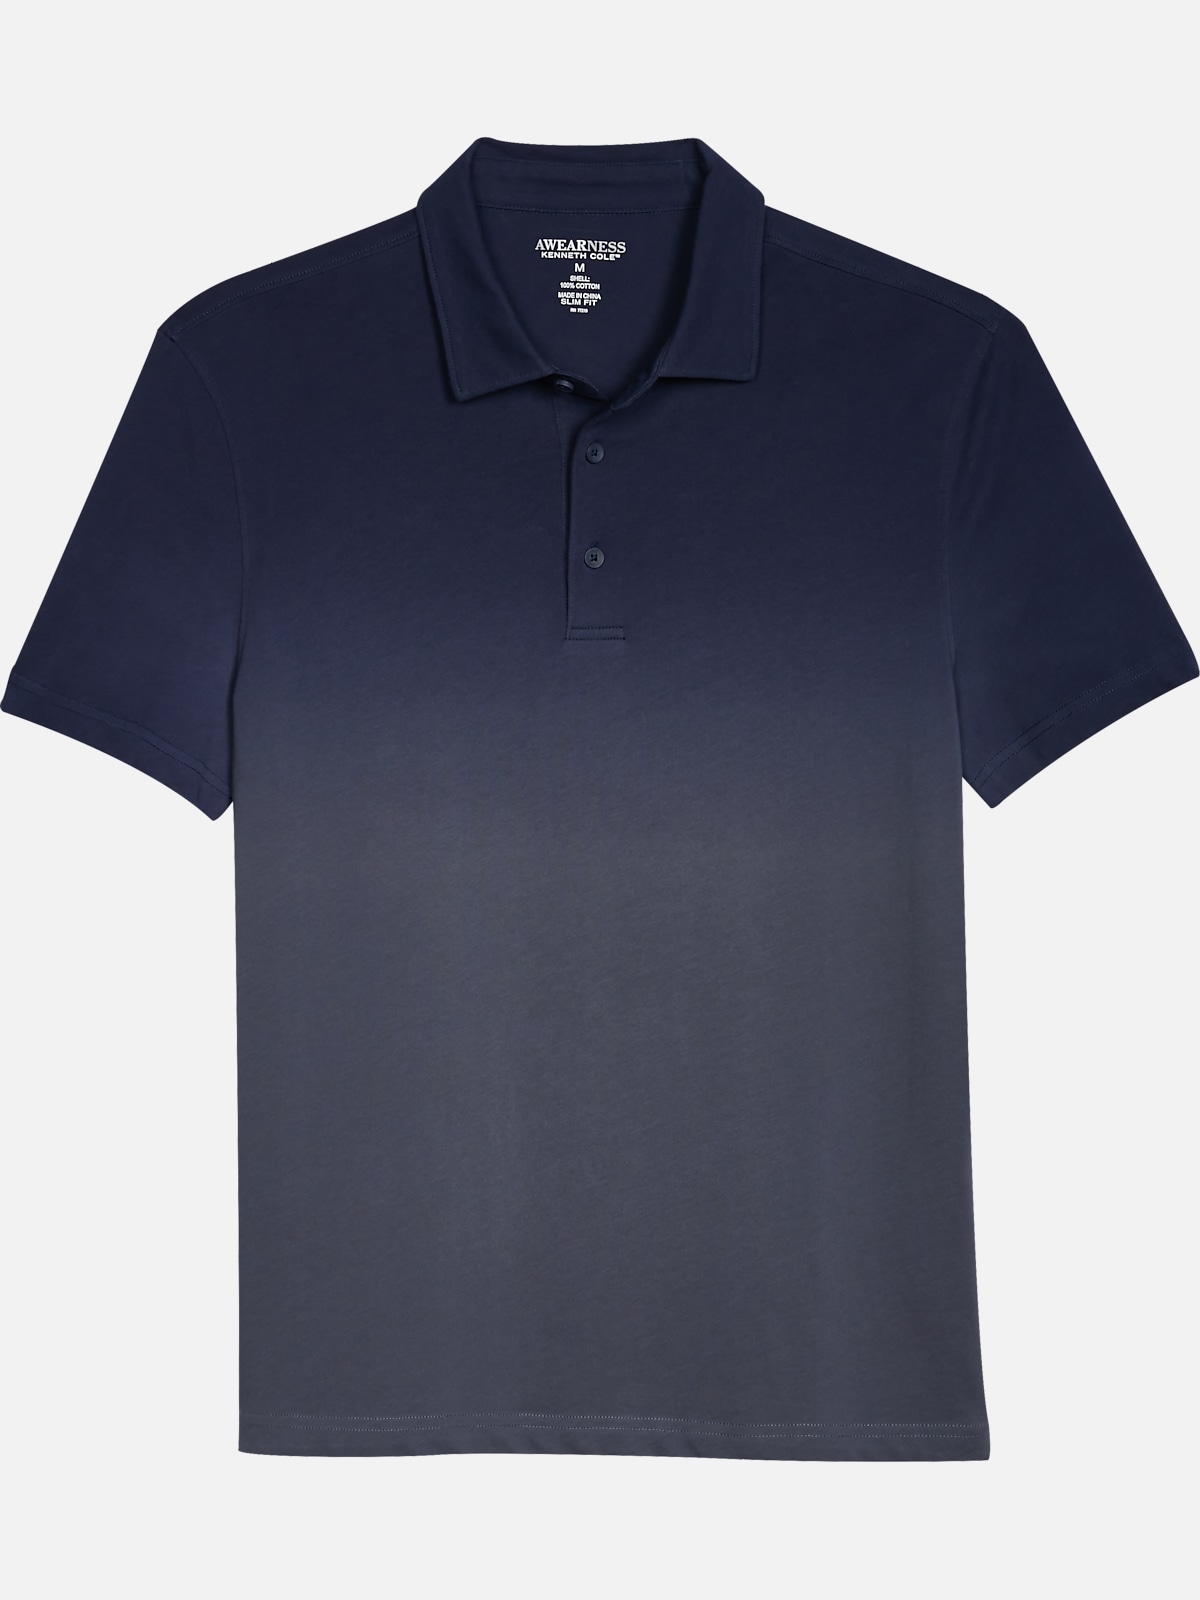 Awearness Kenneth Cole Slim Fit Polo Shirt | All Clearance $39.99| Men ...